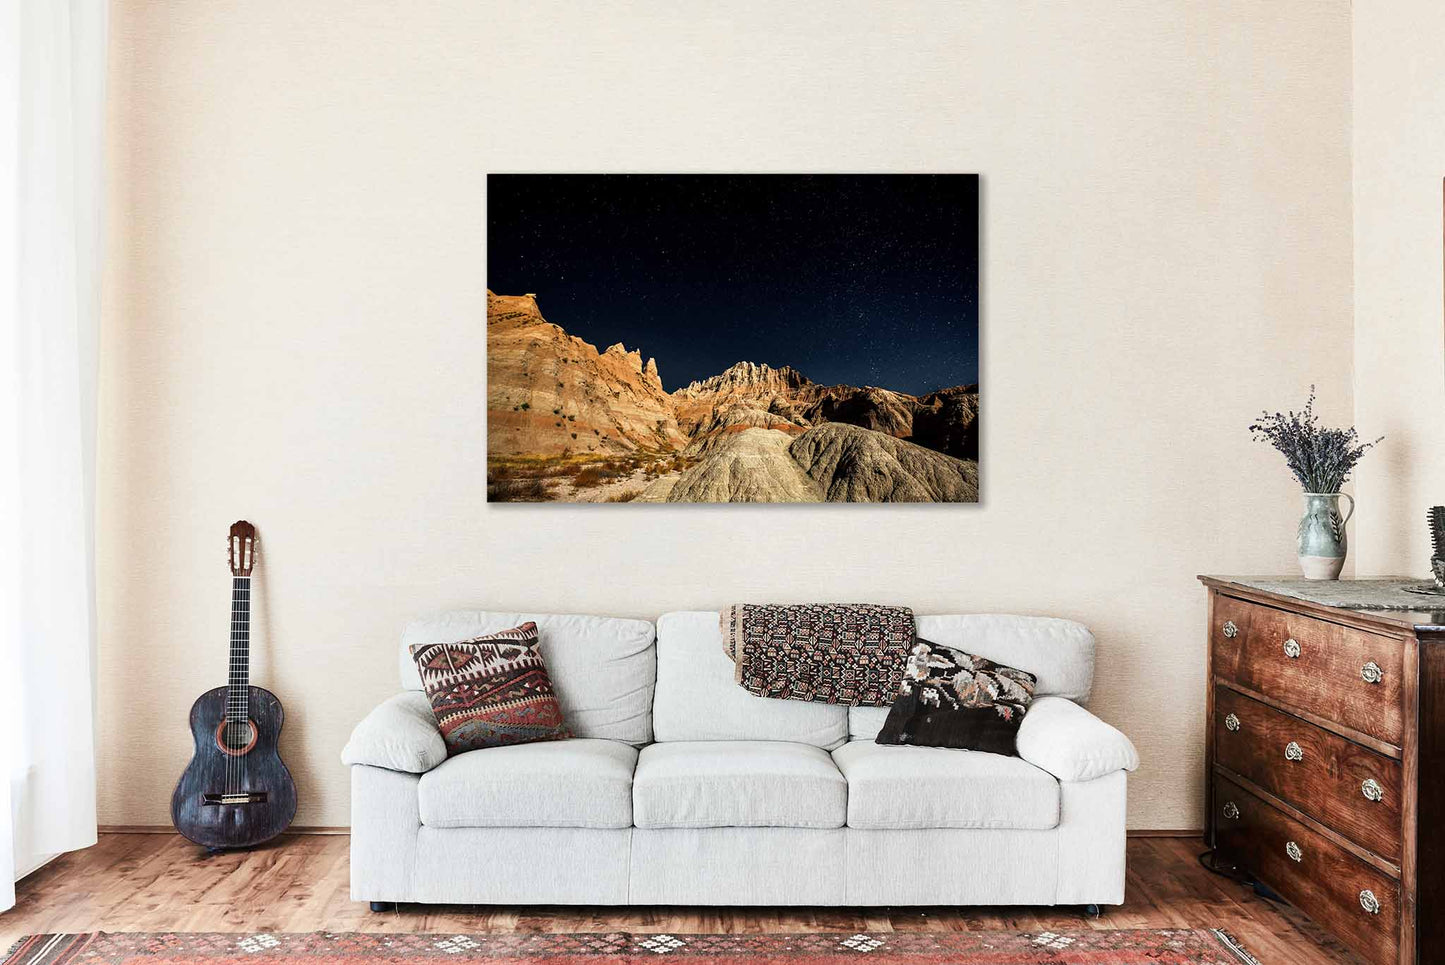 Great Plains Metal Print (Ready to Hang) Photo on Aluminum of Starry Night Sky Over Pinnacles in Badlands National Park South Dakota Western Wall Art Nature Decor